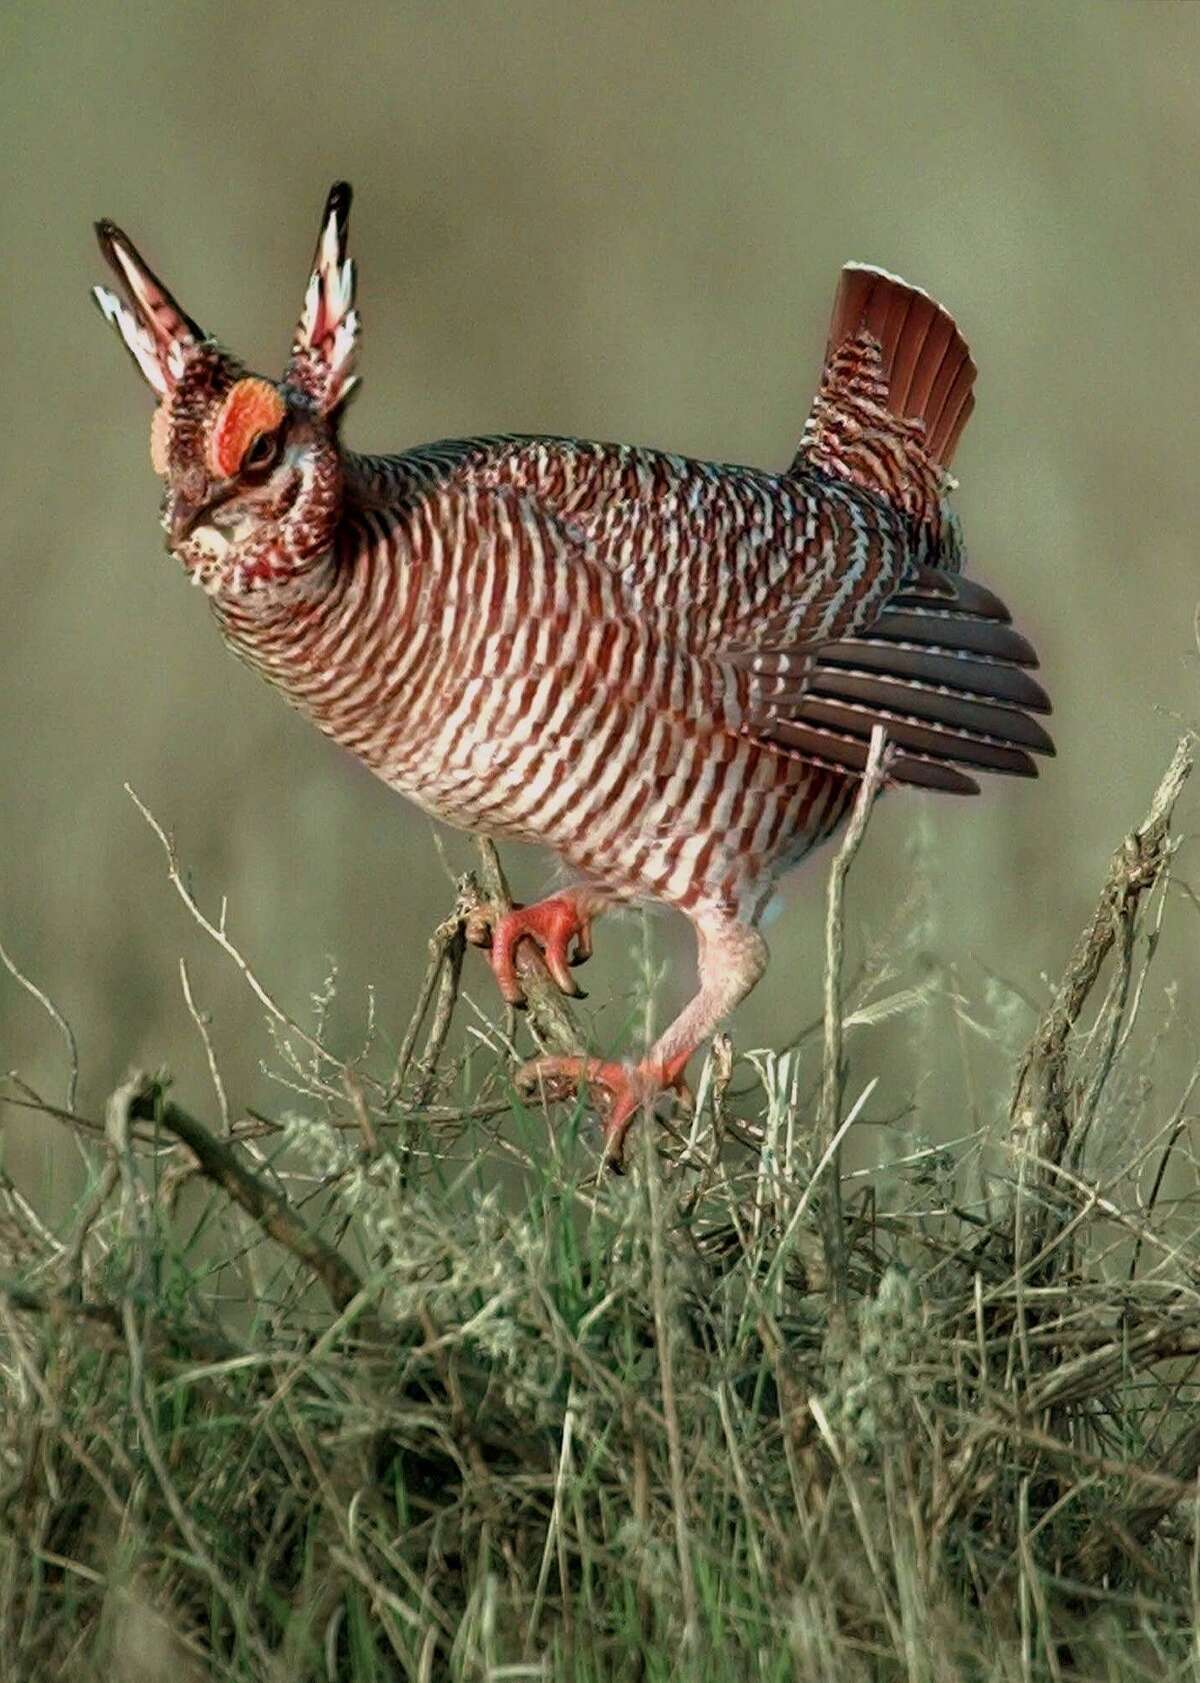 The lesser prairie chicken was removed from the threatened and endangered species list earlier this year following court rulings in Texas and a decision by government lawyers not to pursue an appeal. However, federal wildlife officials Tuesday agreed to reconsider the status of a grouse found in pockets across the Great Plains.